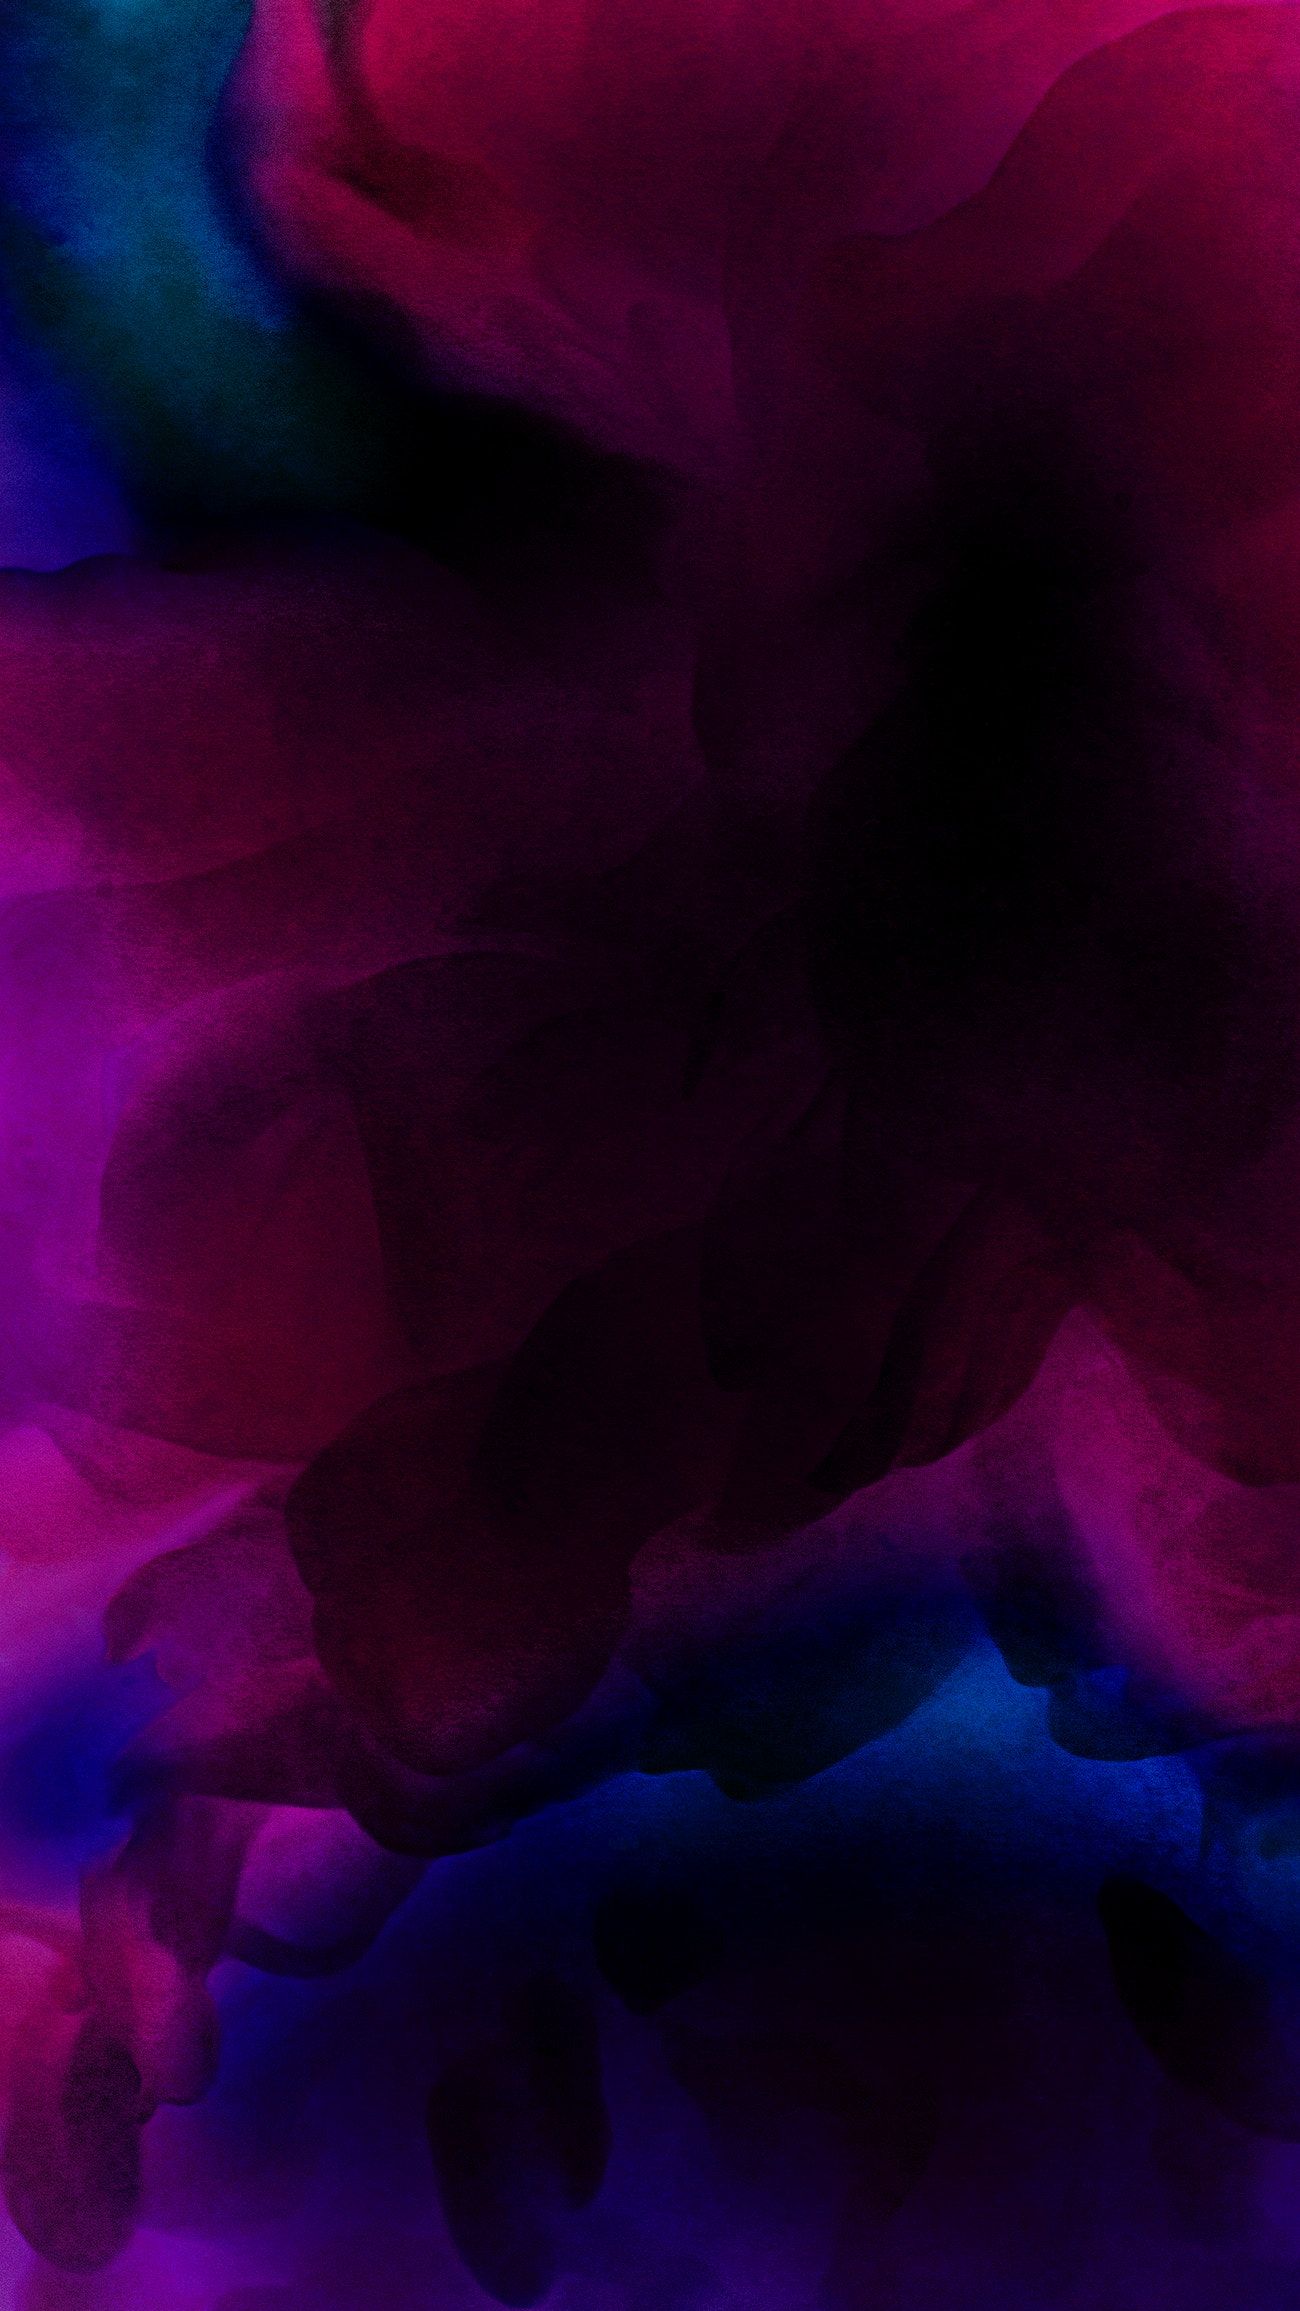 Red, pink, and blue watercolor background. Royalty free illustration